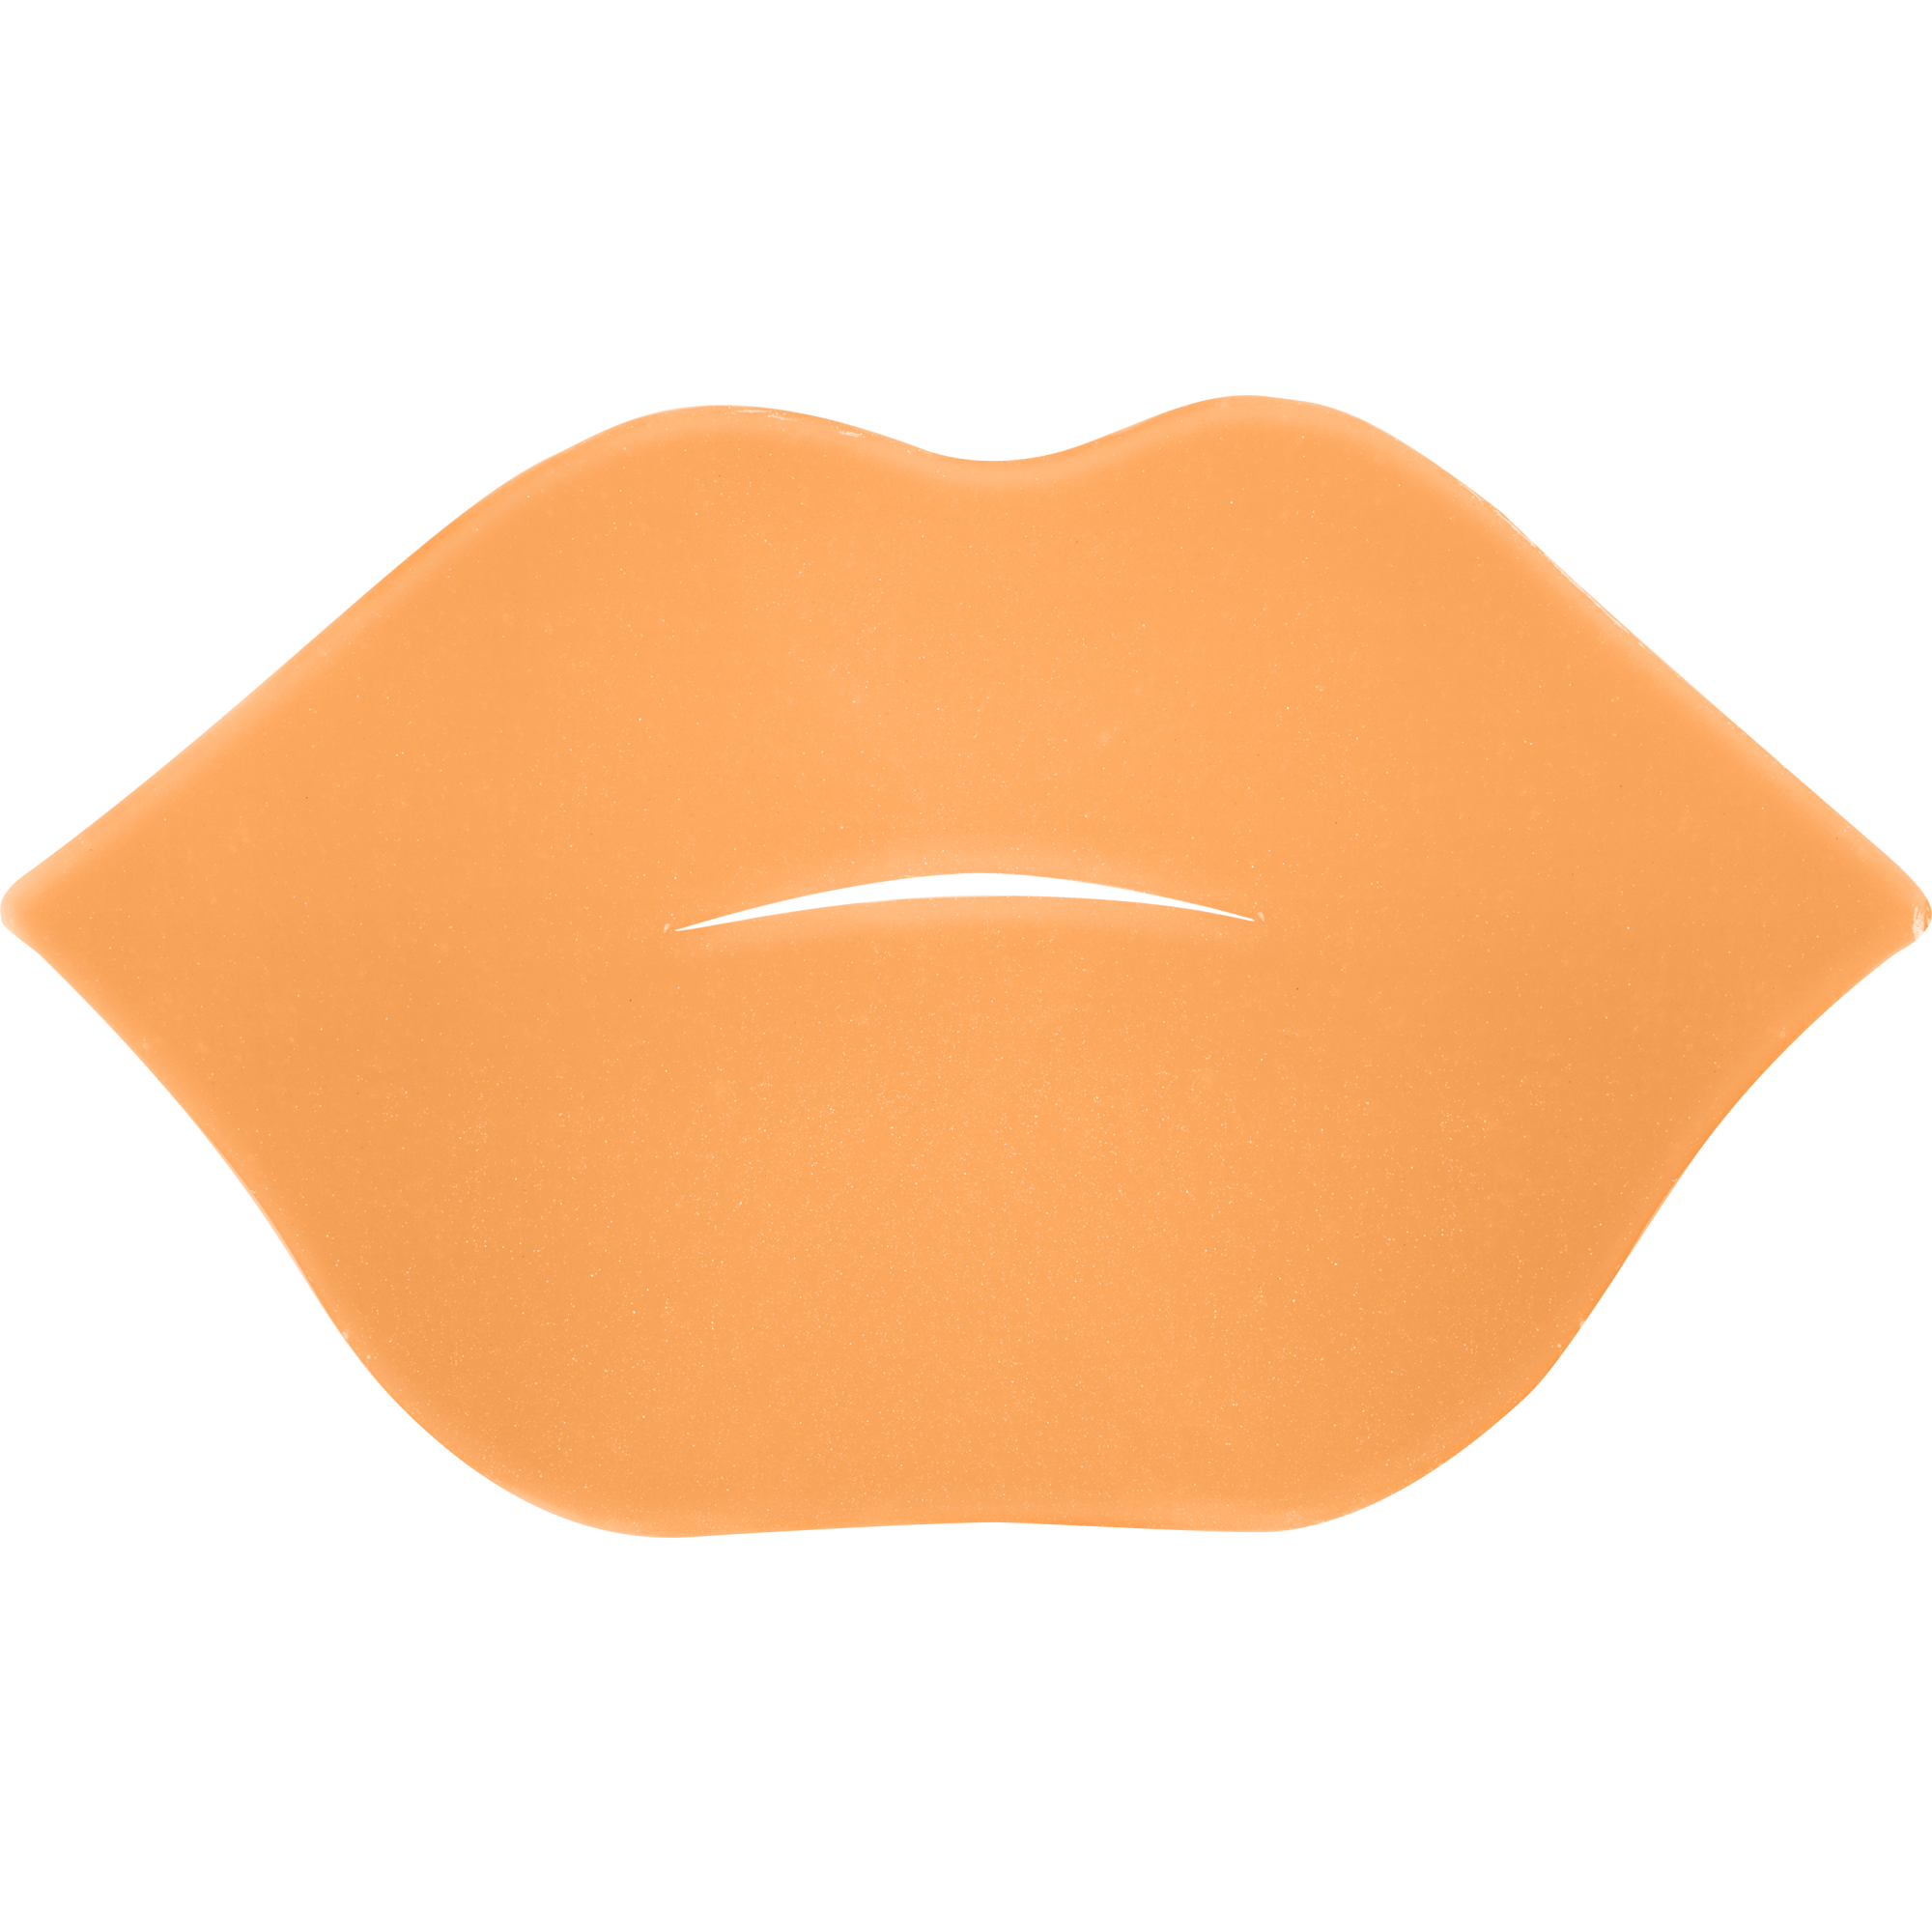 Pumpkins pretty please! smoothing lip patch